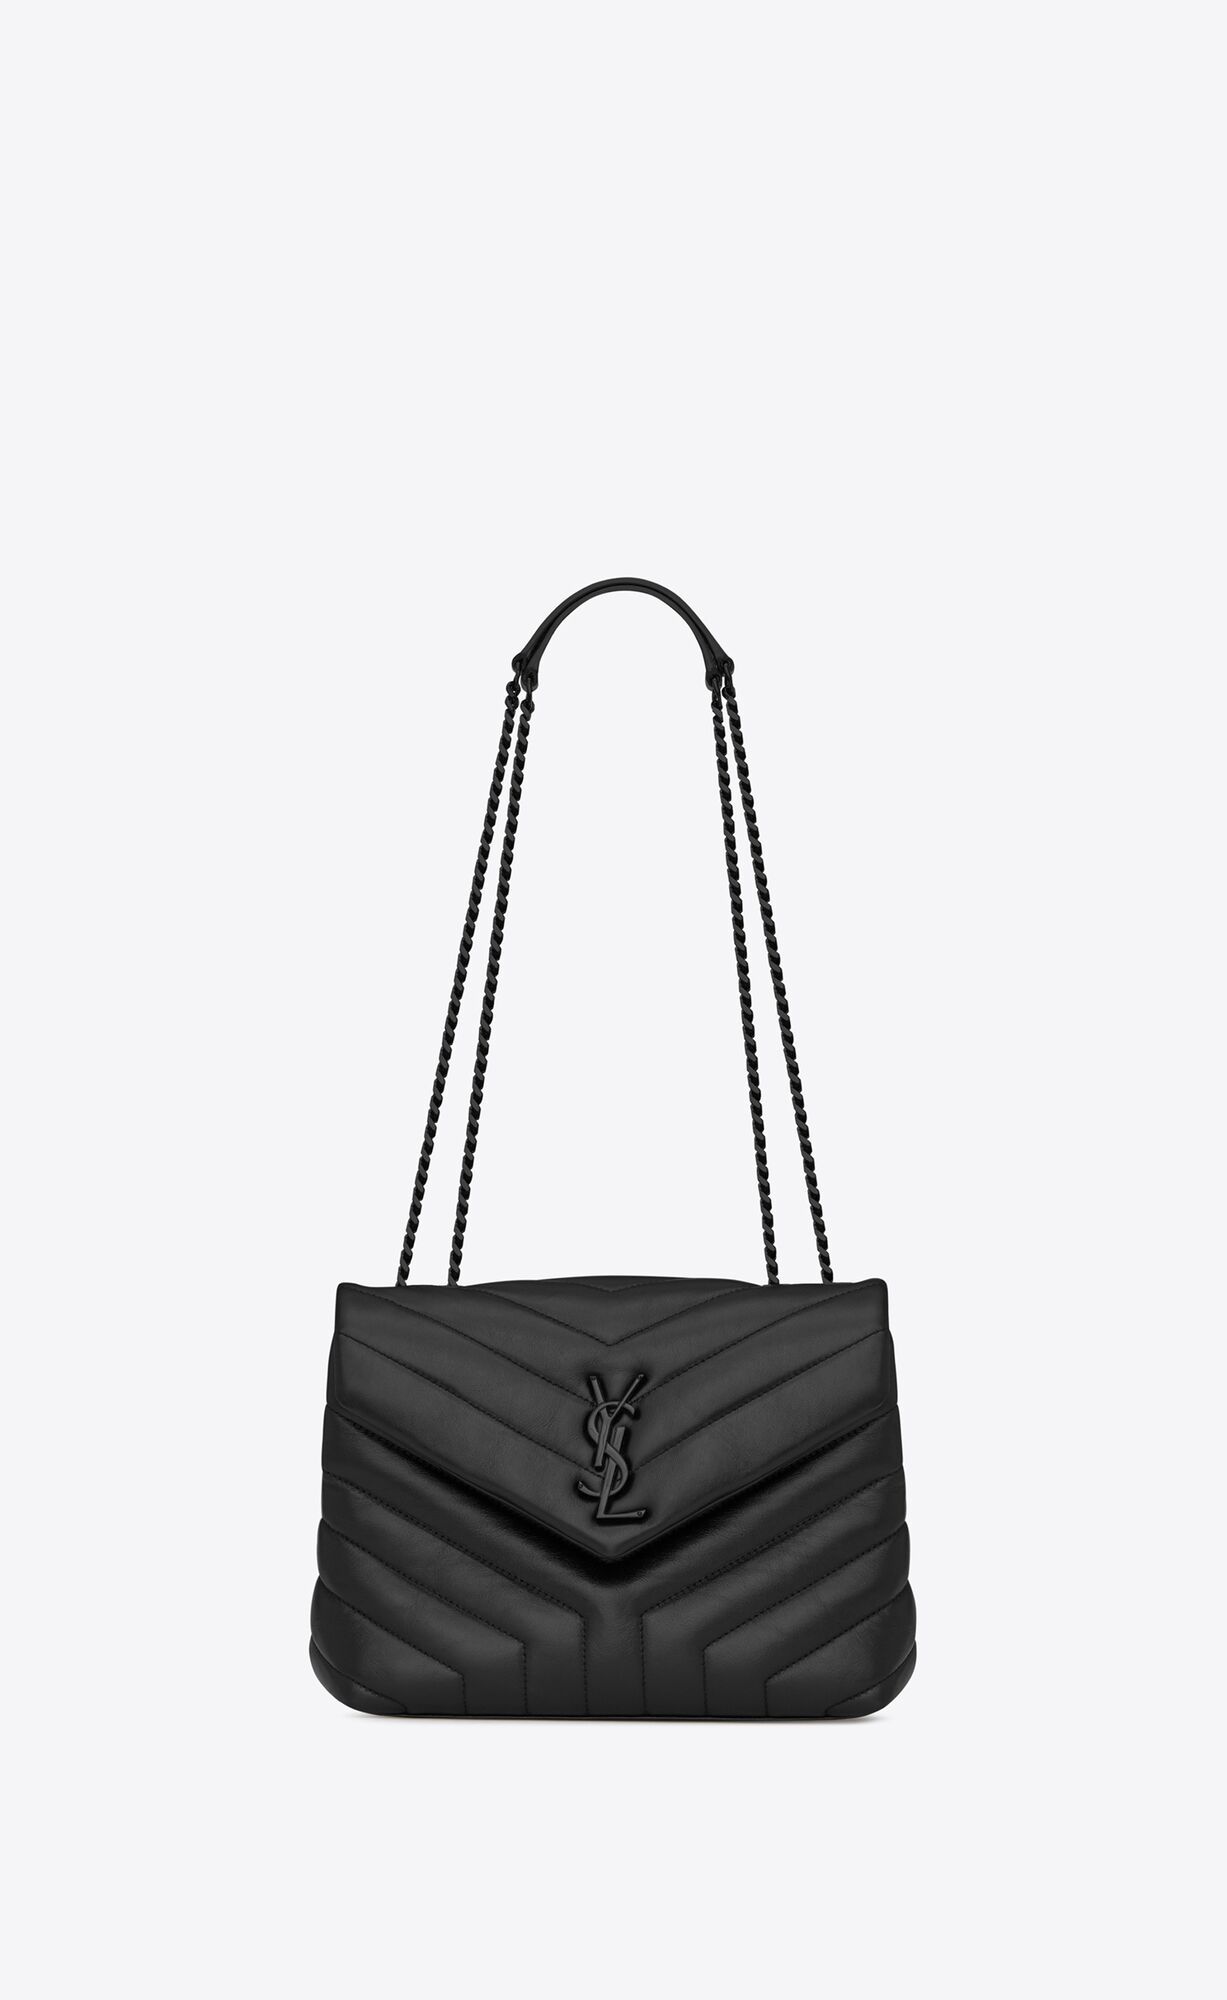 BAG WITH FRONT FLAP, FEATURING INTERLACED METAL YSL INITIALS, A LEATHER AND METAL CHAIN STRAP THA... | Saint Laurent Inc. (Global)